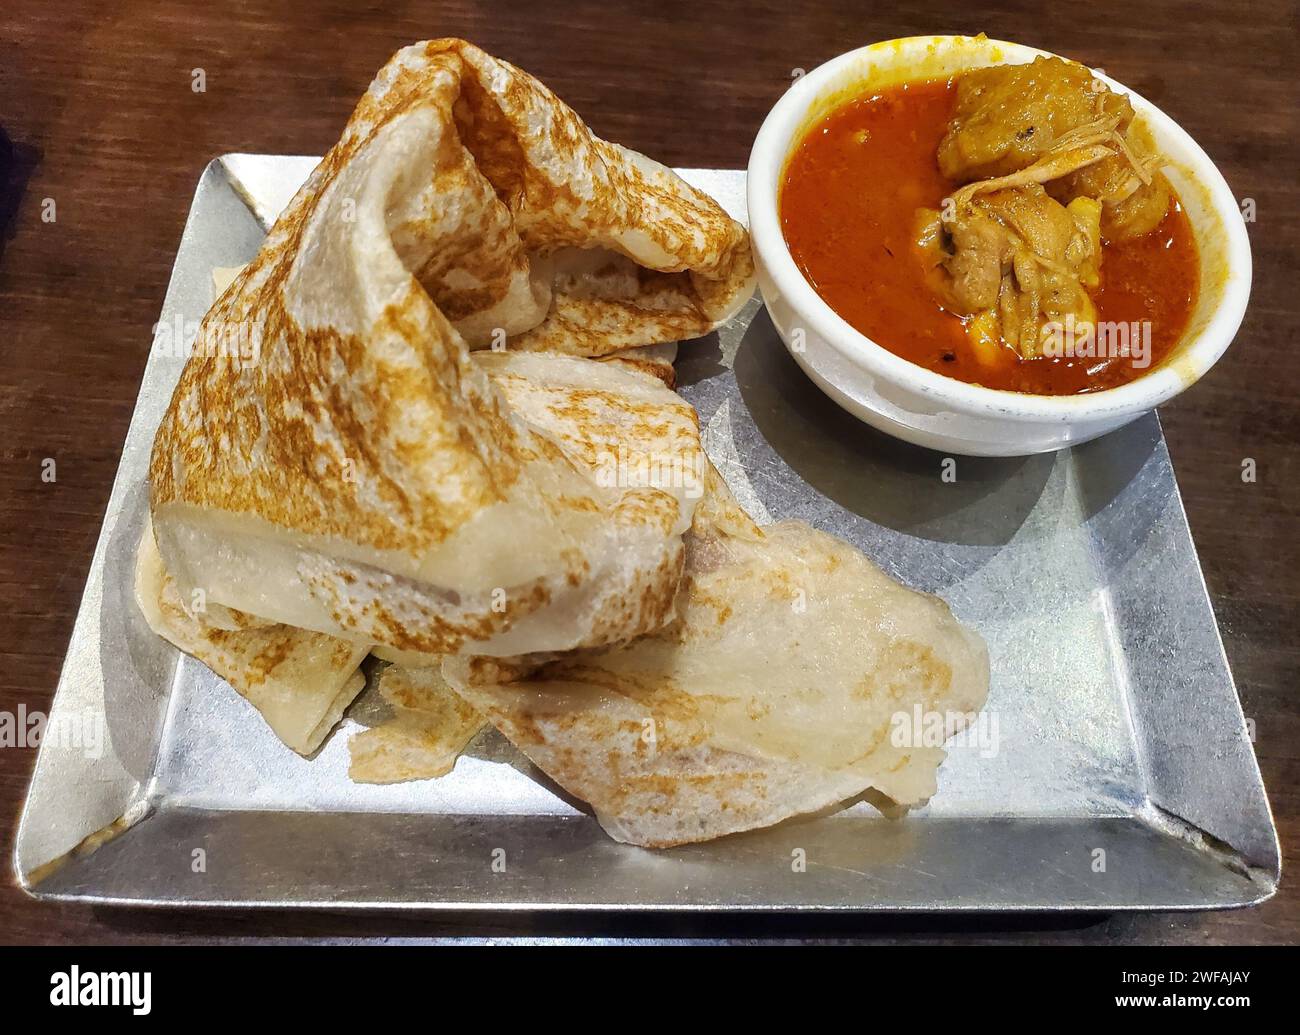 Malaysian pancake, also known as roti canai, with a side of chicken curry in gravy Stock Photo